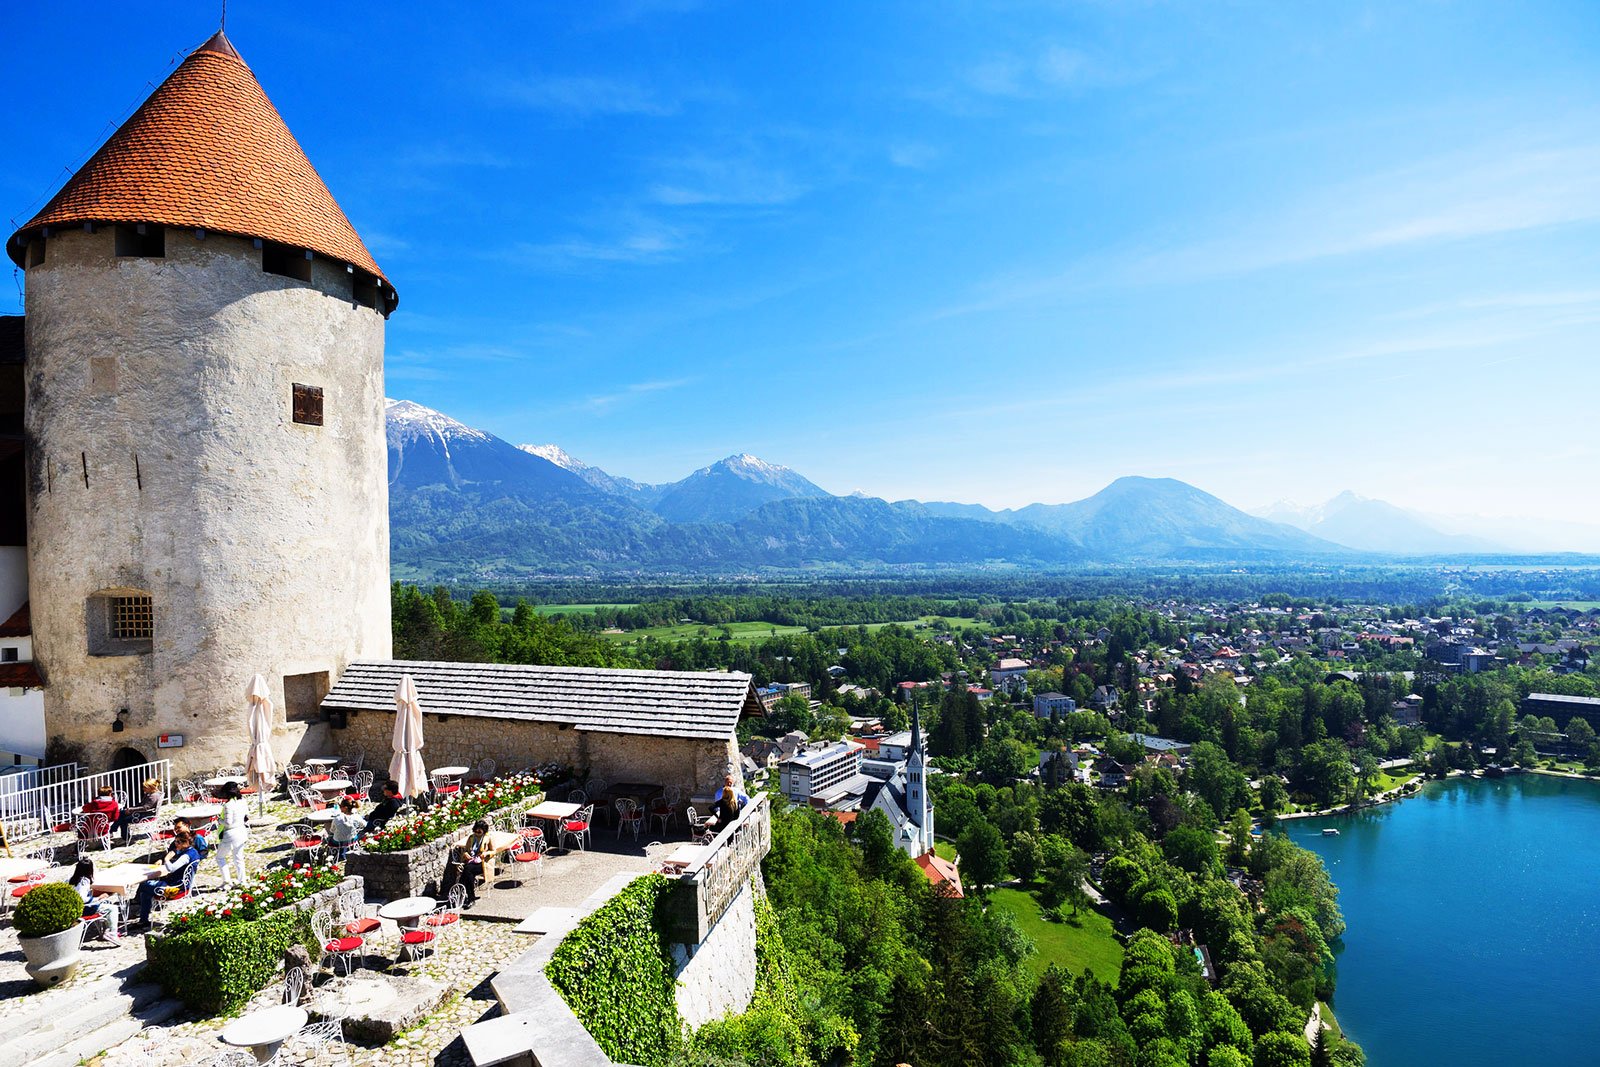 How to climb up to Bled Castle in Ljubljana